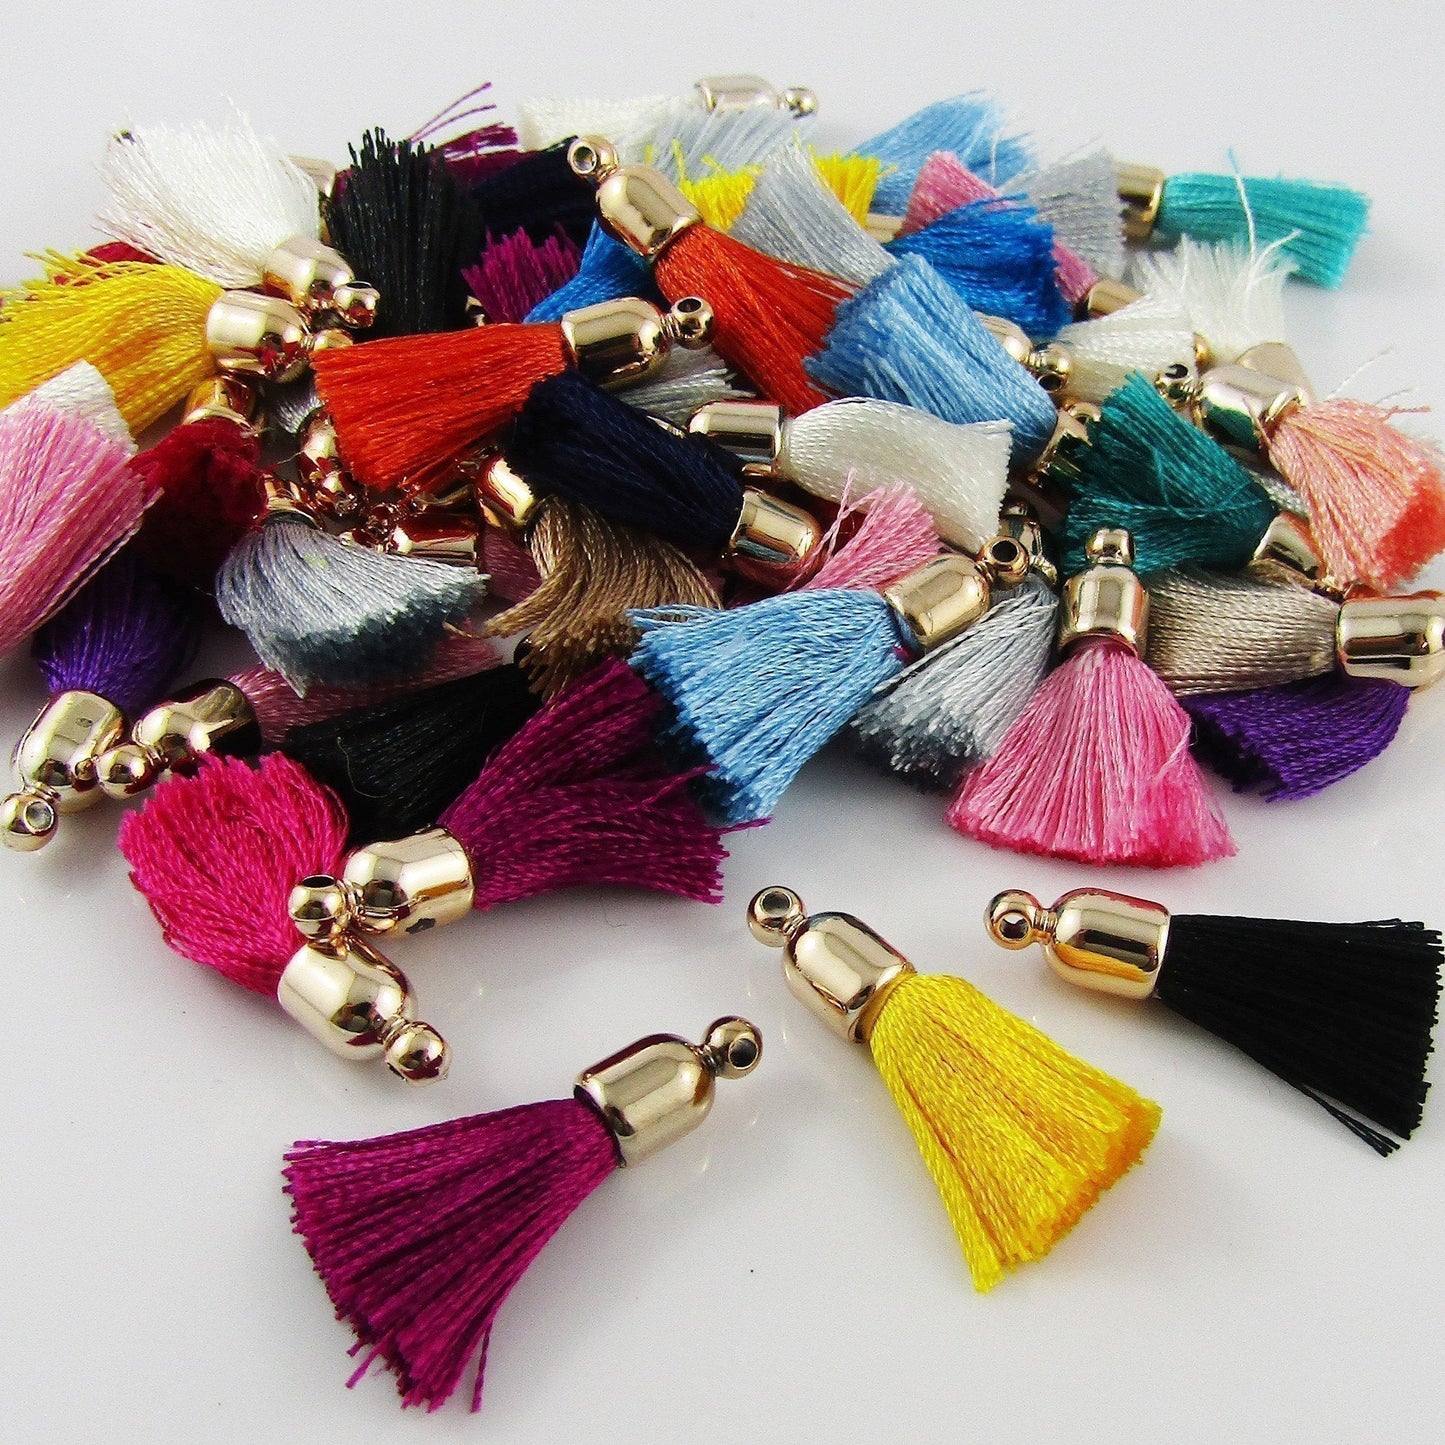 10pce (5 pairs) Small Silky Polyester Tassel with Gold Cap 25mm Earrings etc